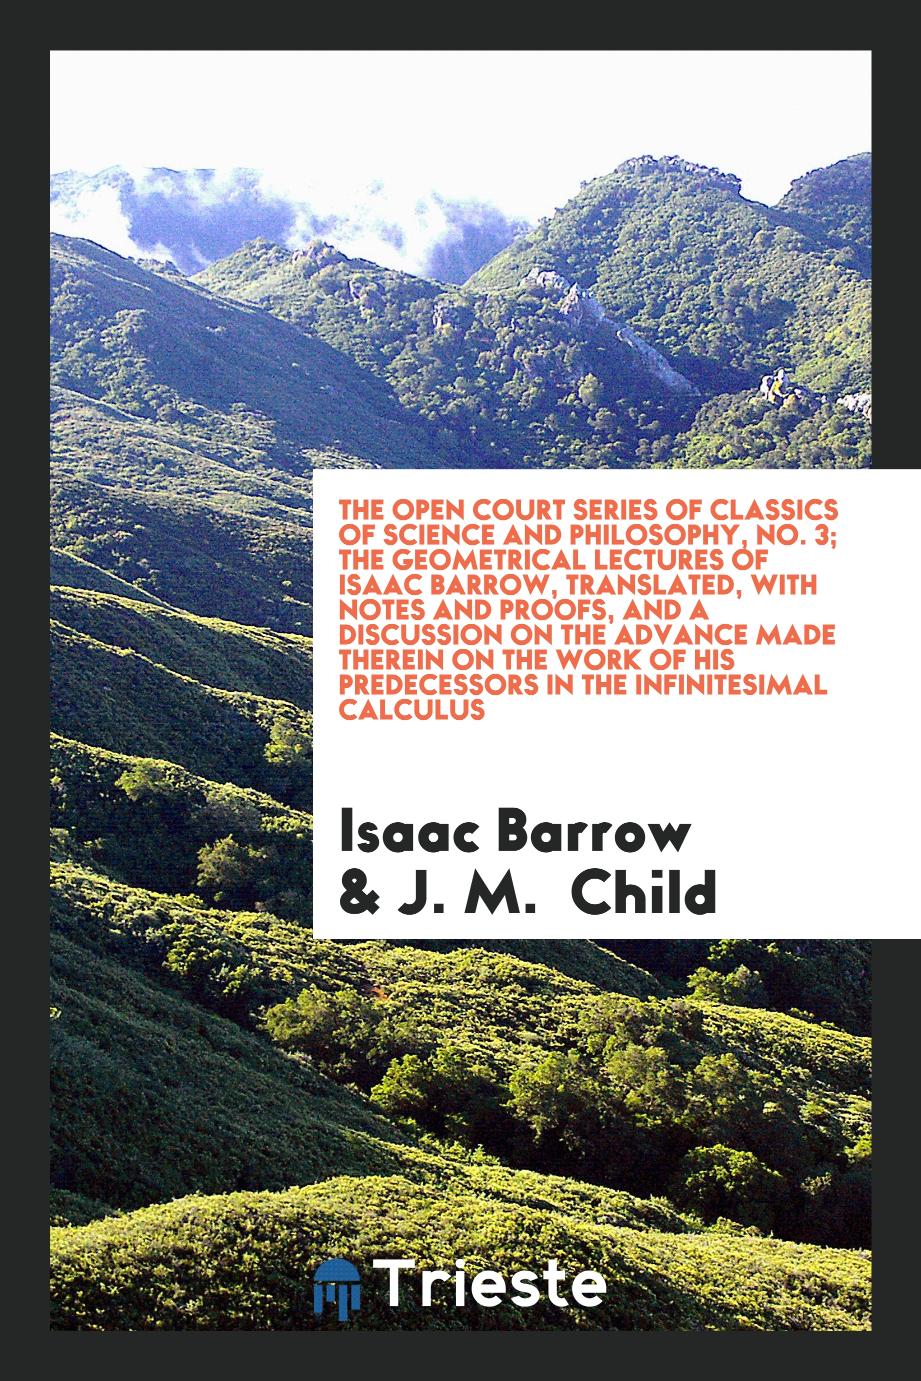 The open court series of classics of science and philosophy, No. 3; The geometrical lectures of Isaac Barrow, translated, with notes and proofs, and a discussion on the advance made therein on the work of his predecessors in the infinitesimal calculus